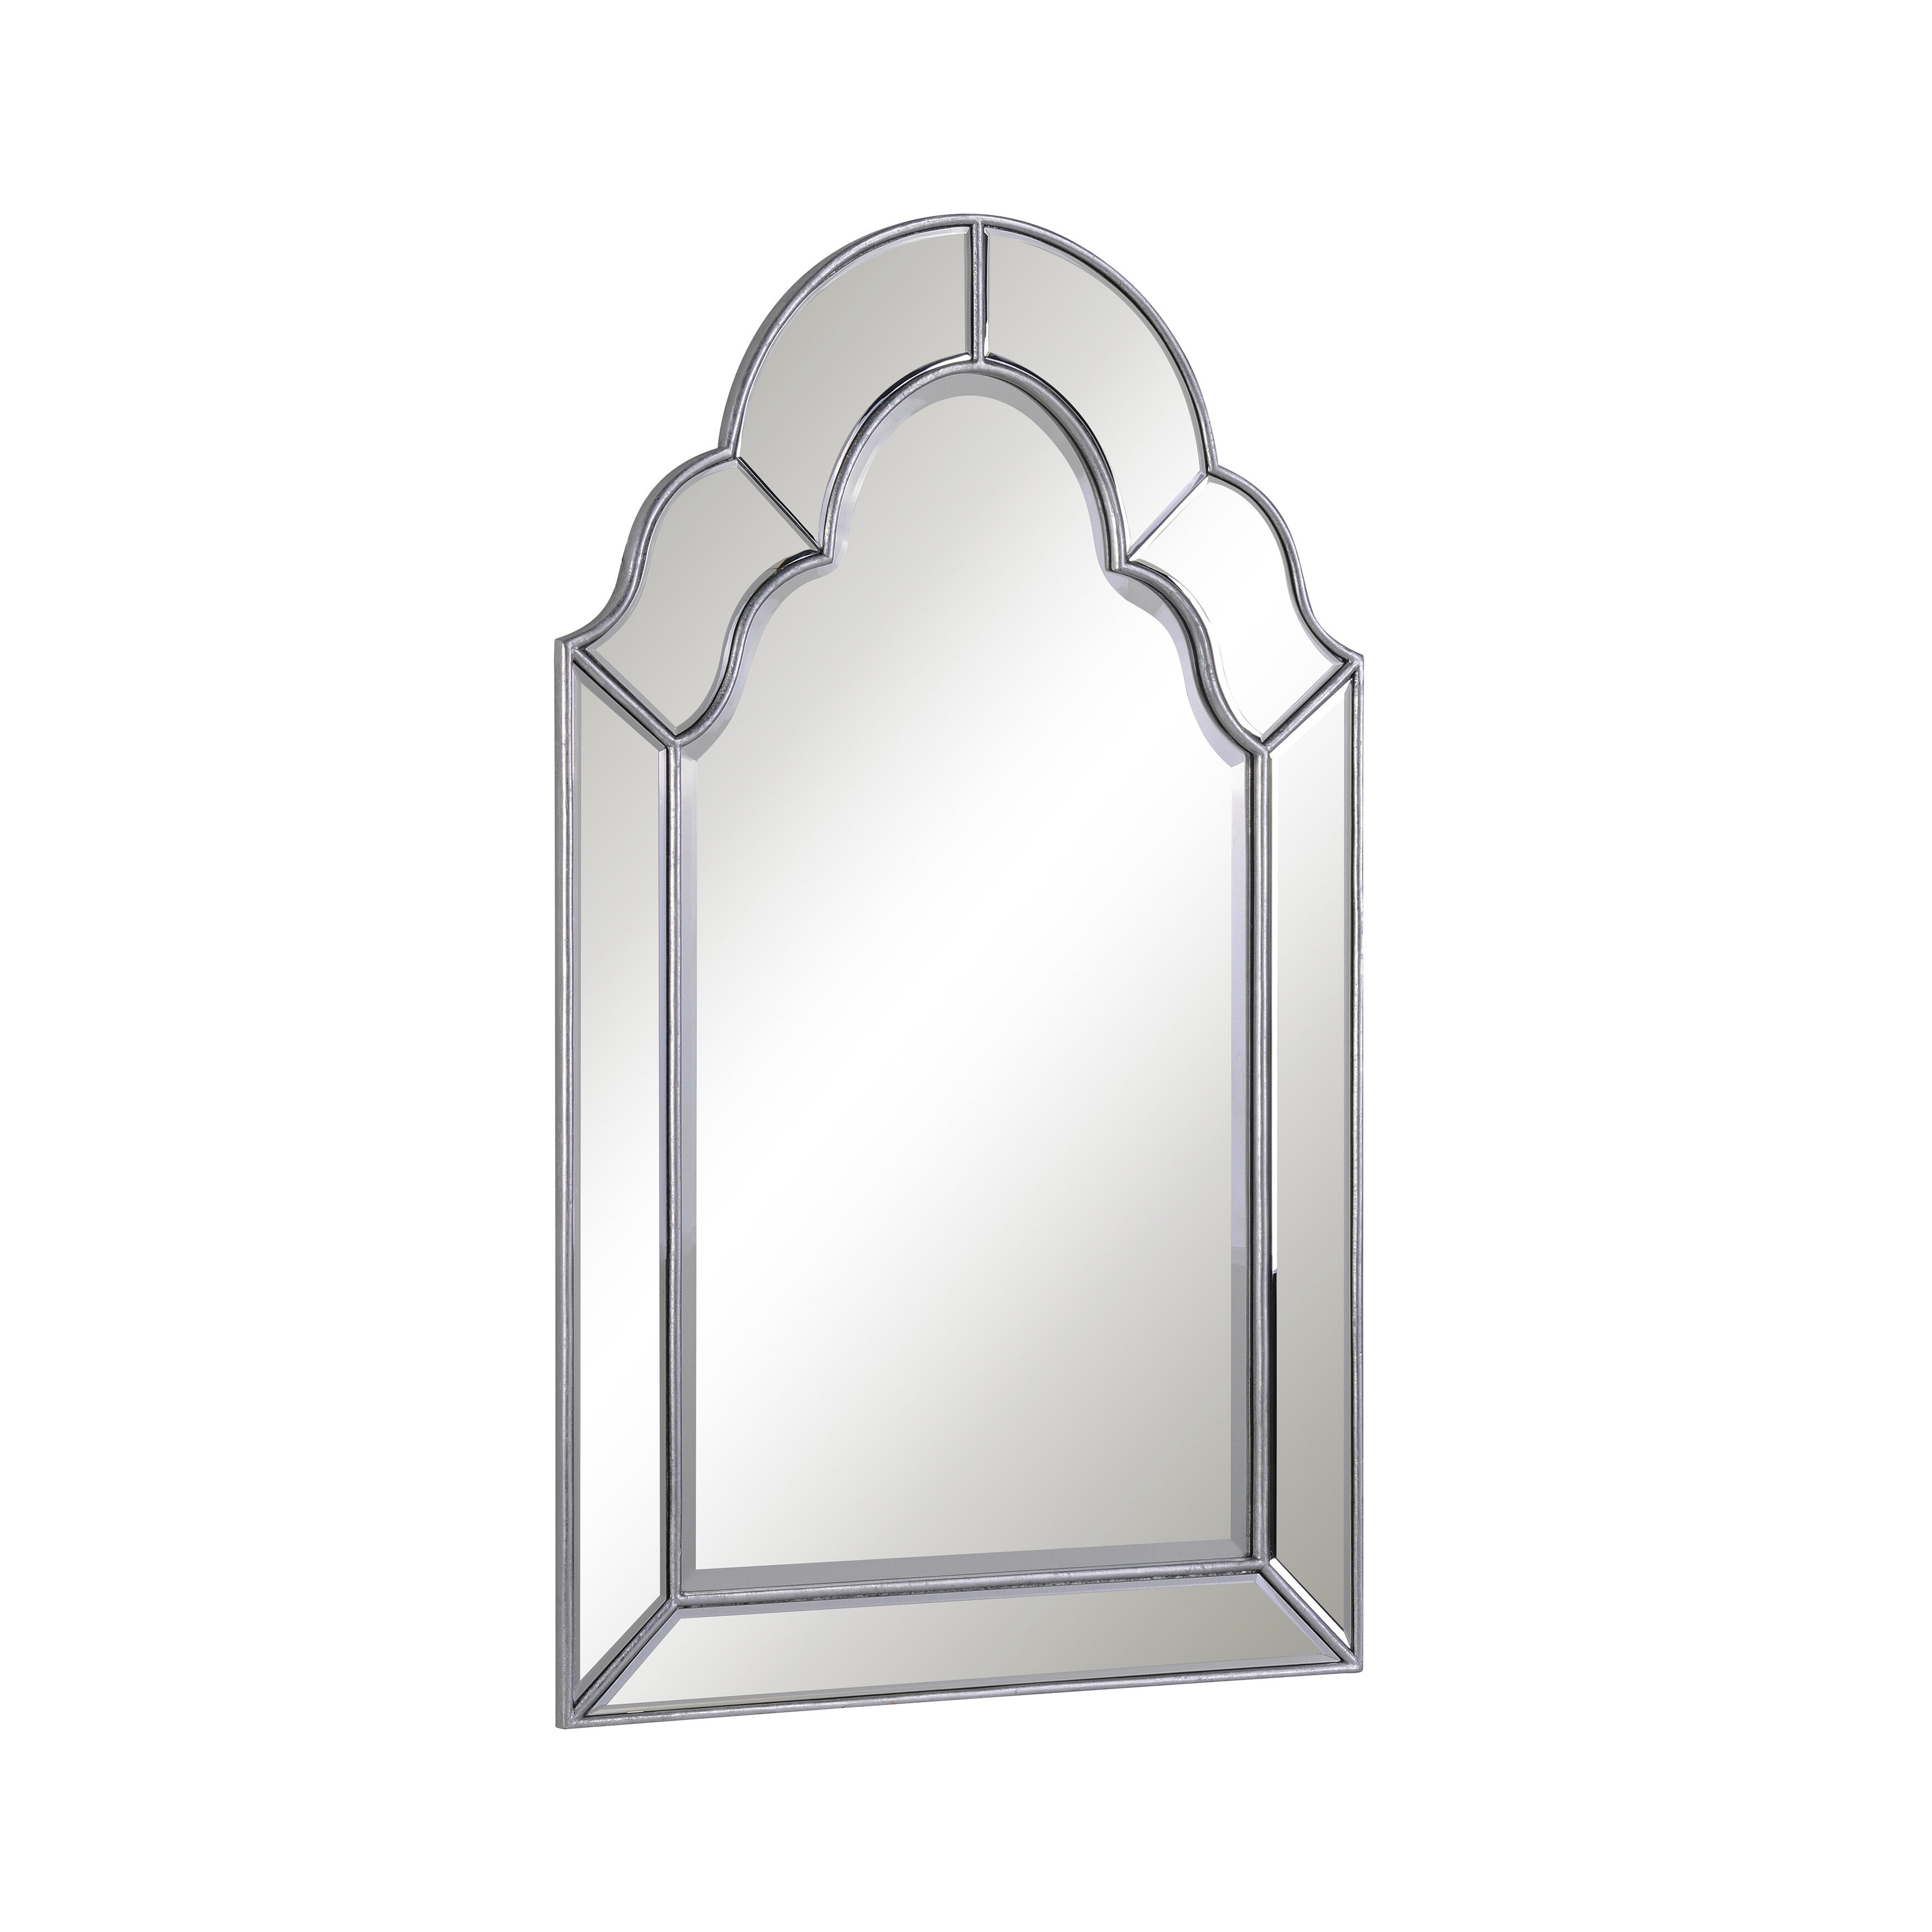 Christopher Knight Home Antique Rectangle Wall Mirror